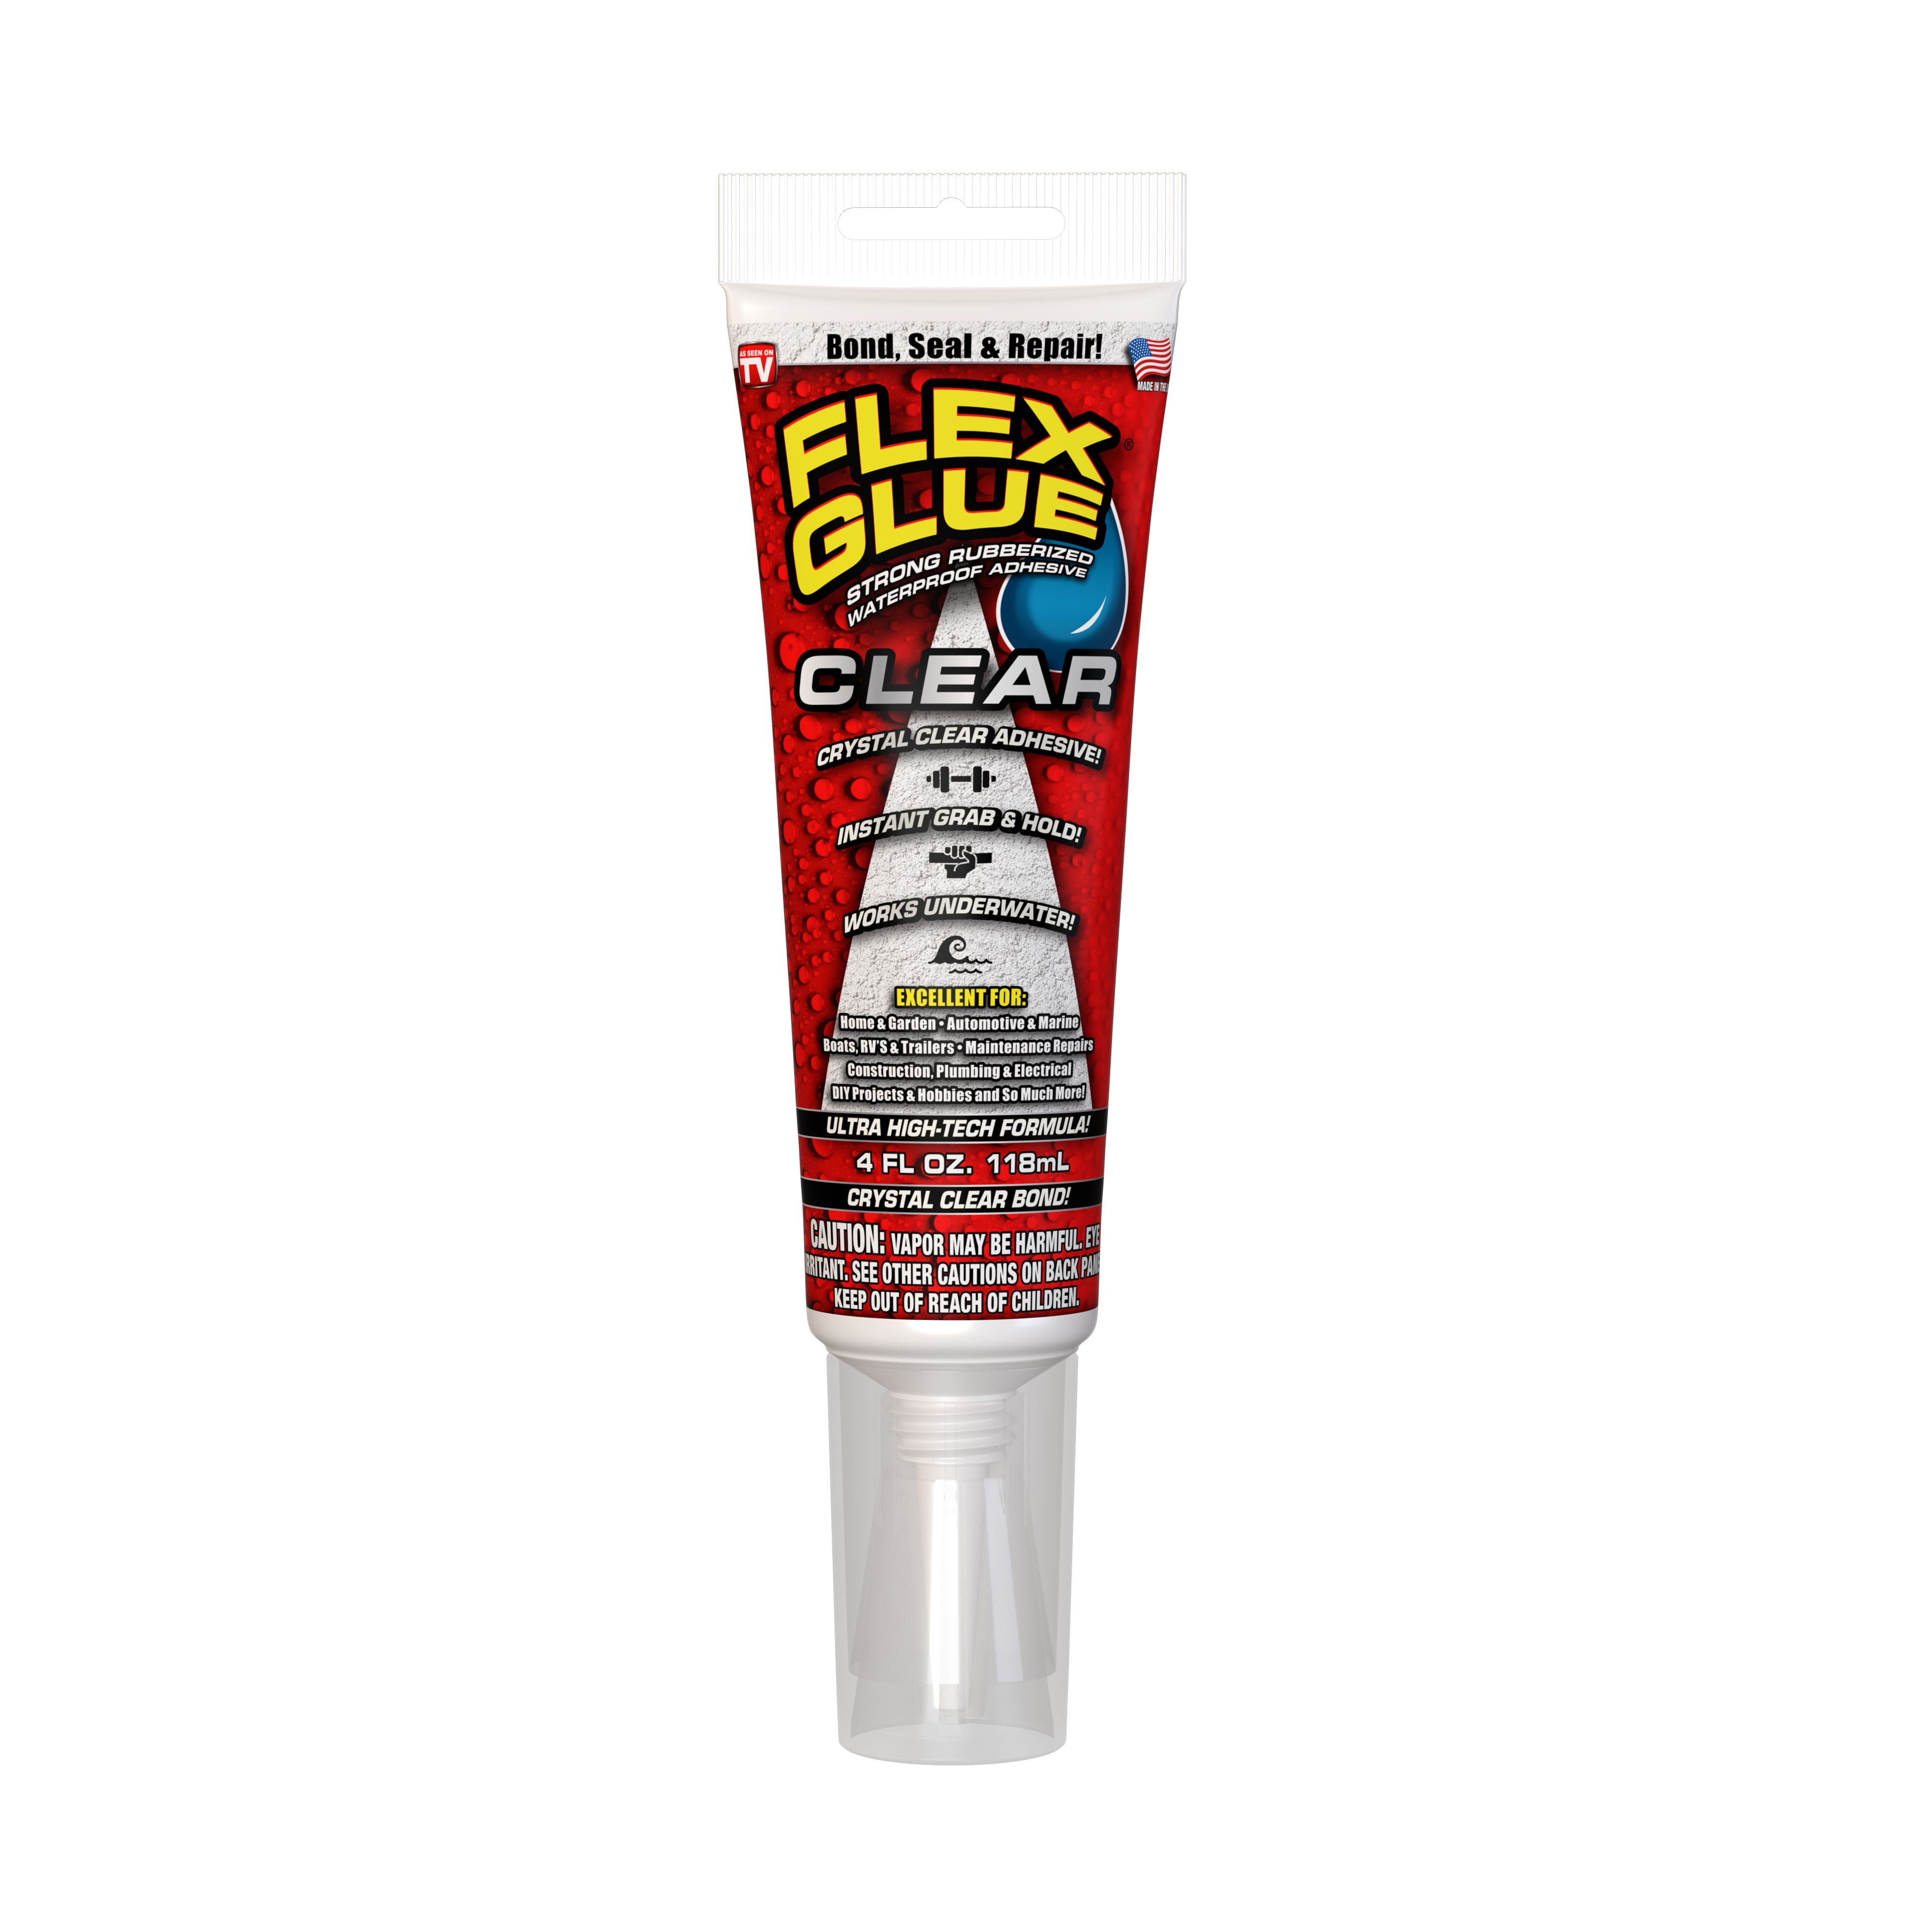 ACROPOIS Flex Glue Strong Rubberized Waterproof Adhesive with Instant Grab UV Resistant Pro Formula for Bond Seals Repair 